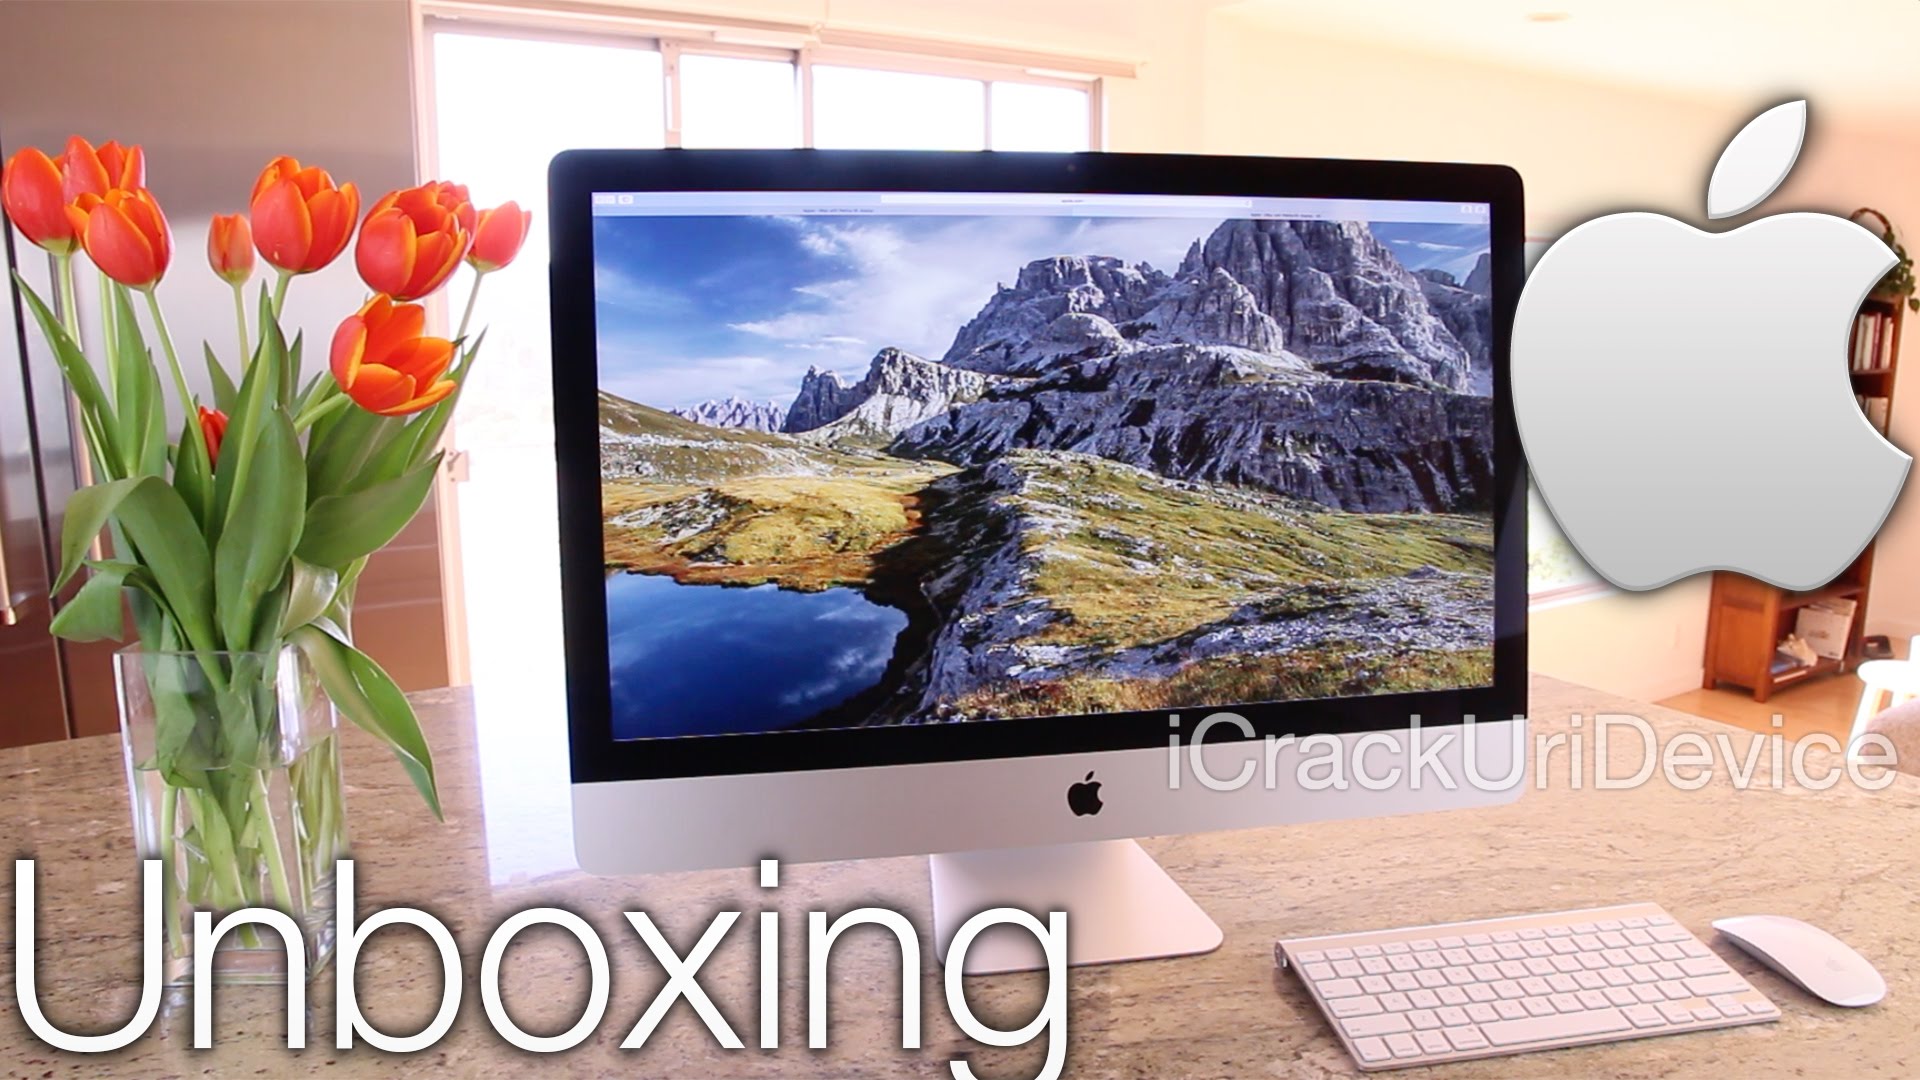 New iMac Retina 5K Display - Unboxing Late 2014: 27 Inch ...